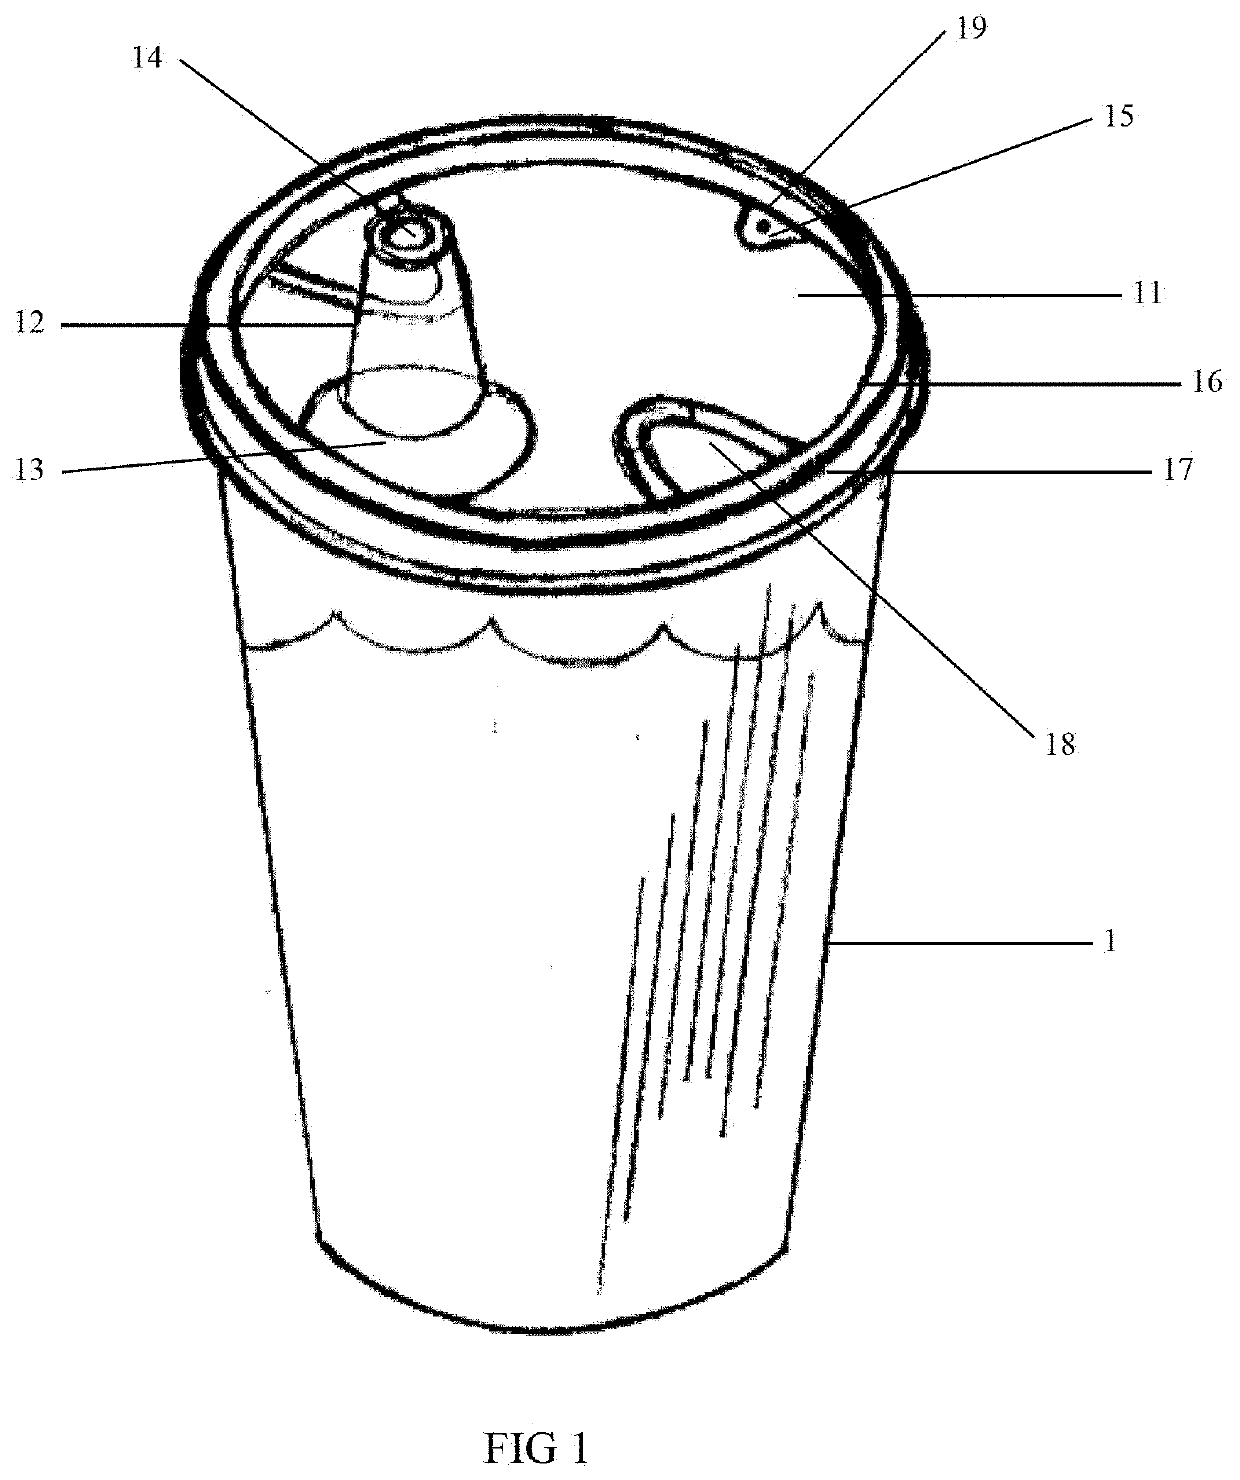 Disposable Lid with Integrated Straw-type Mouthpiece, Finger Indentations and Pressure Equalization Valve to Fit Standard Sized Disposable Drinking Cups